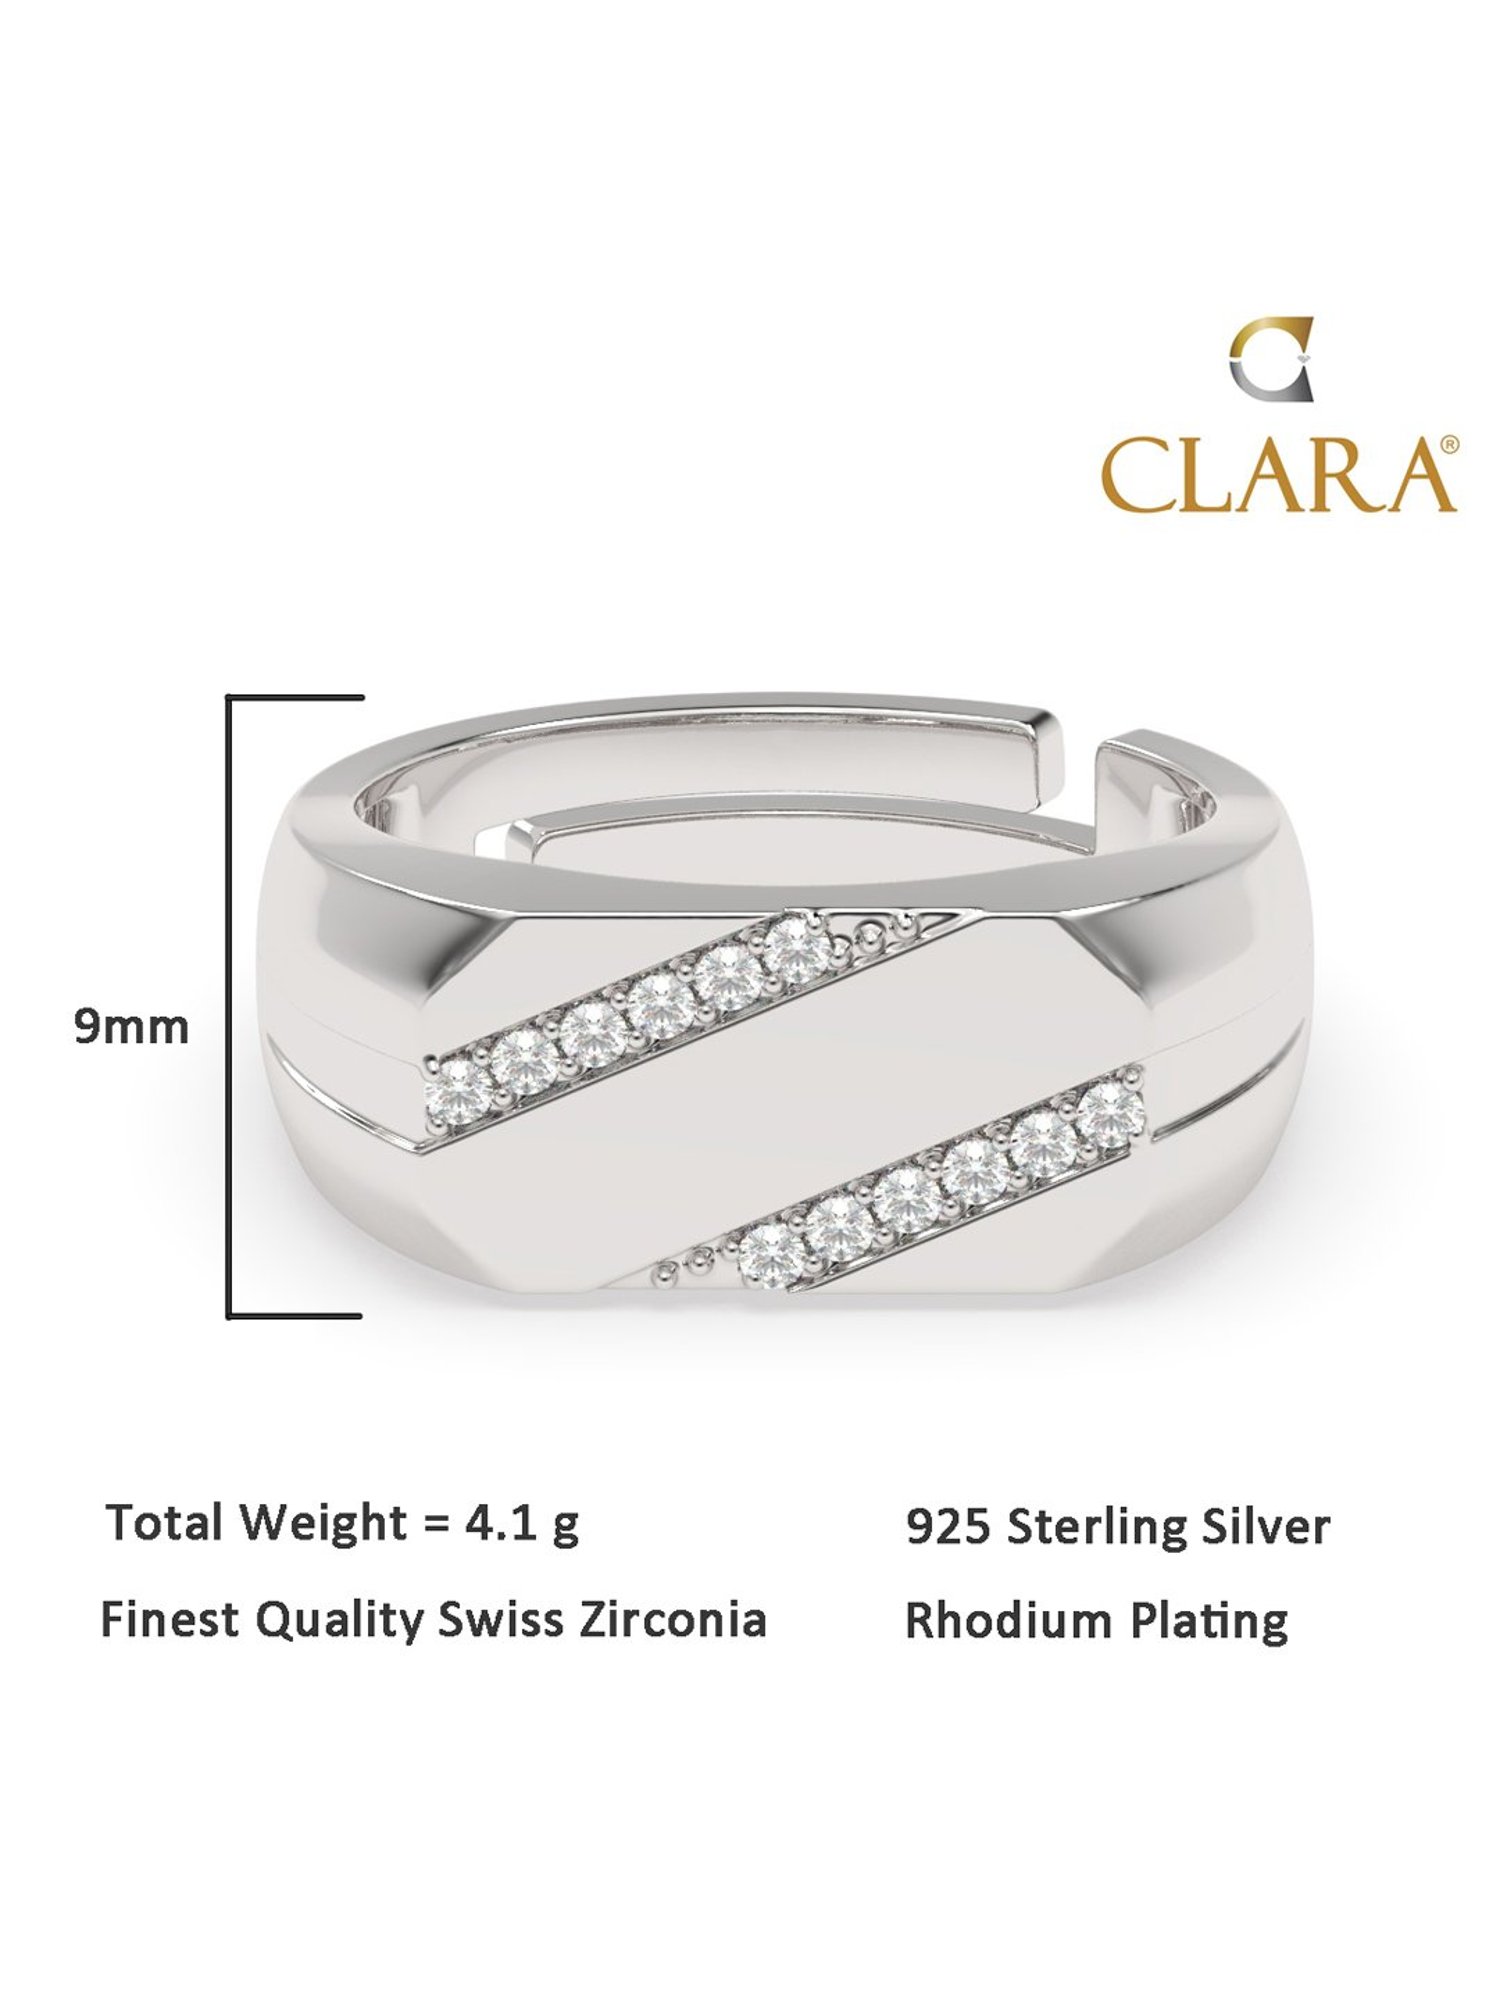 CLARA Pure 925 Sterling Silver Nario Adjustable Couple Band 5.2 g Online in  India, Buy at Best Price from Firstcry.com - 13814694